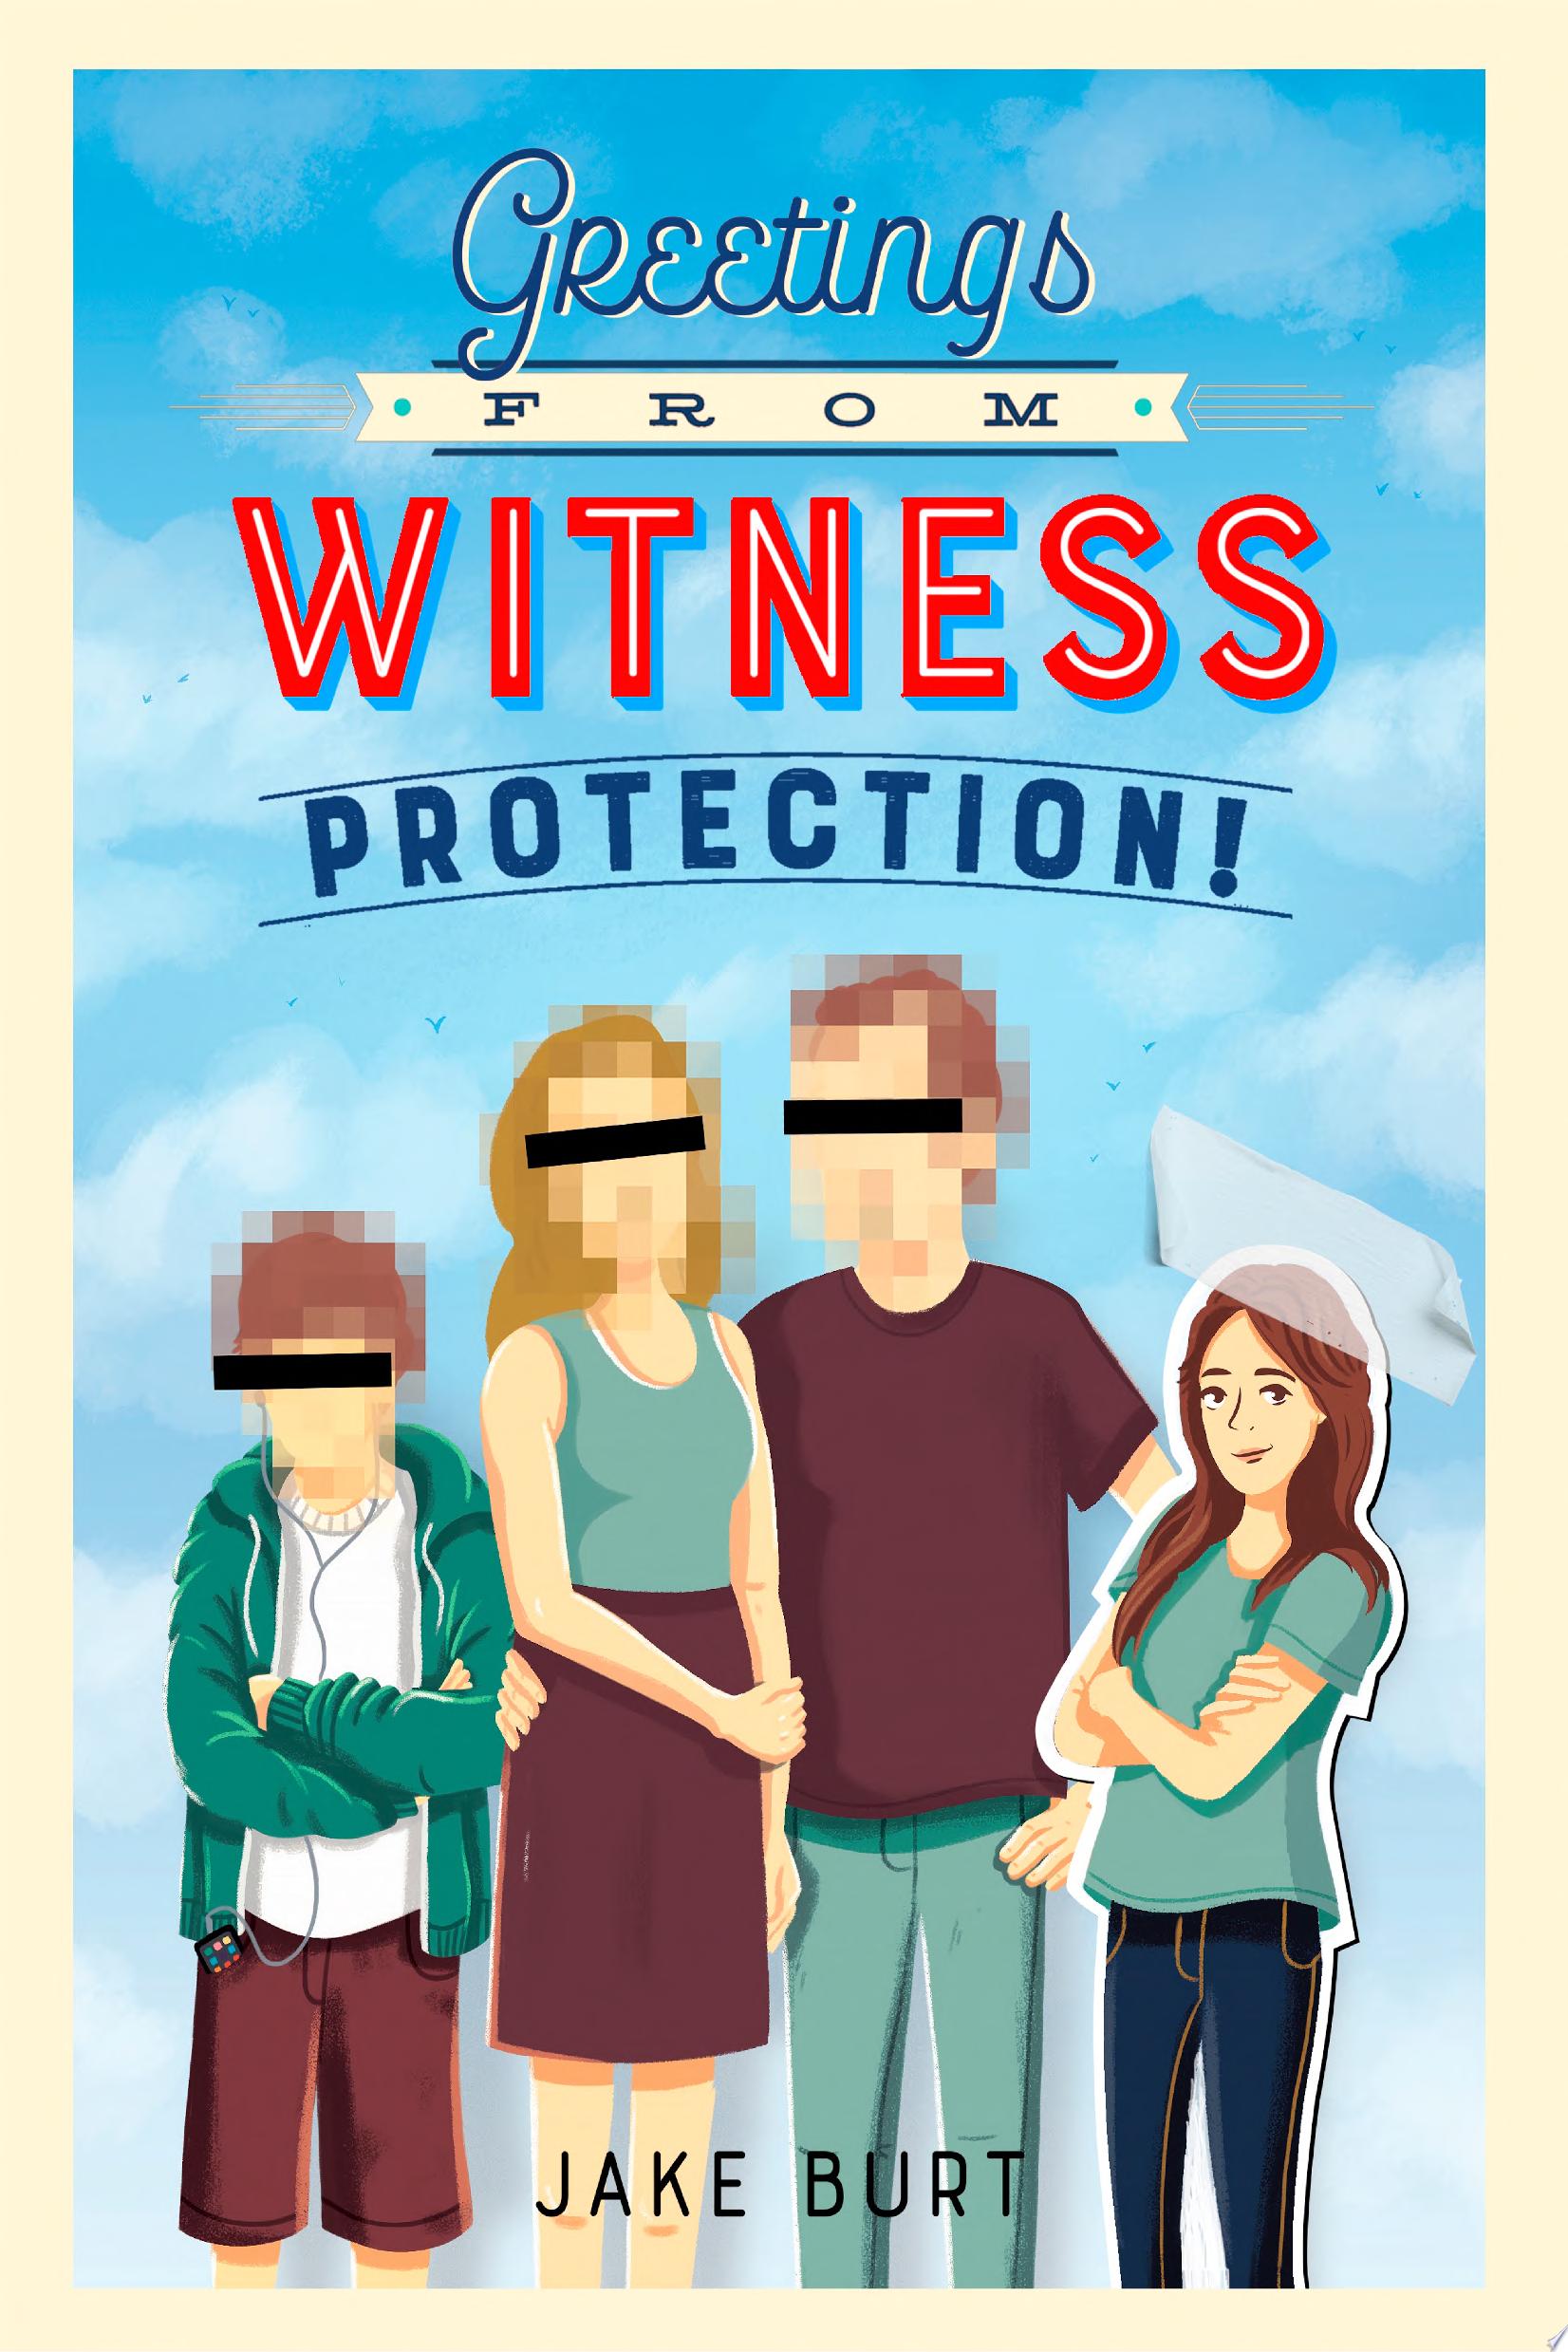 Image for "Greetings from Witness Protection!"